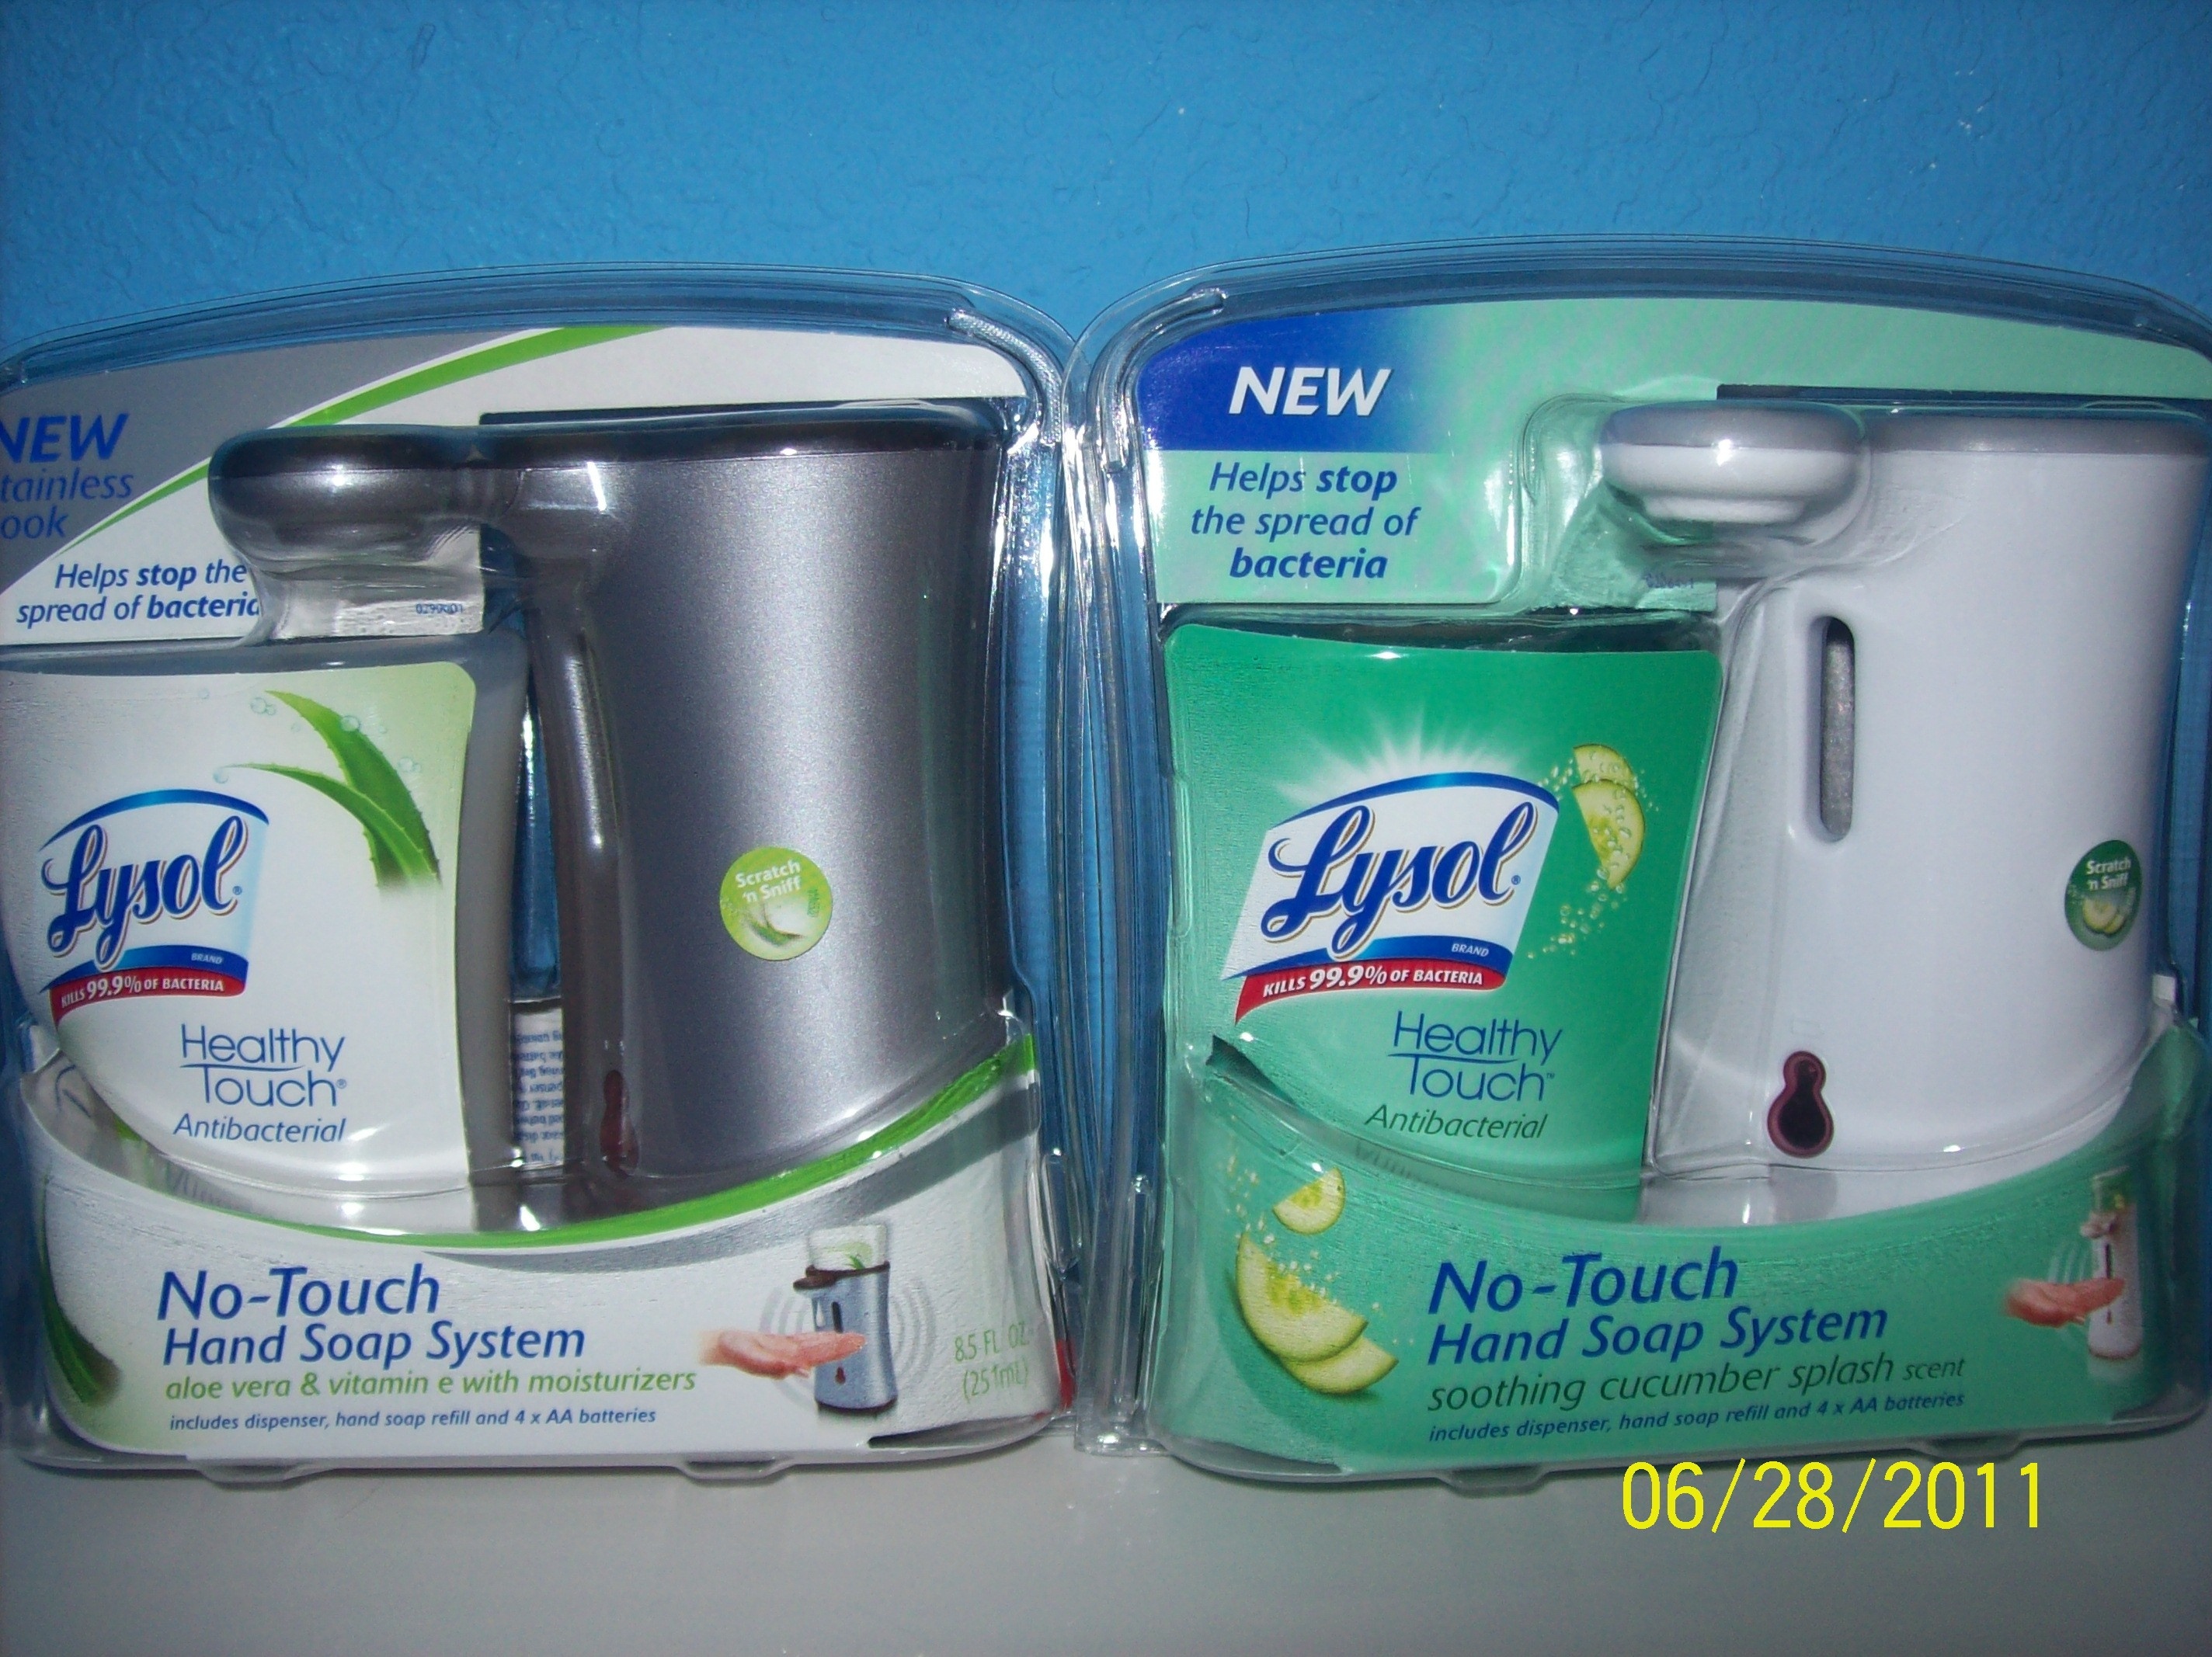 Dollar General Lysol No-Touch Hand Soap $2.00 - The Krazy Coupon Lady - Lysol Hands Free Soap Dispenser Printable Coupon